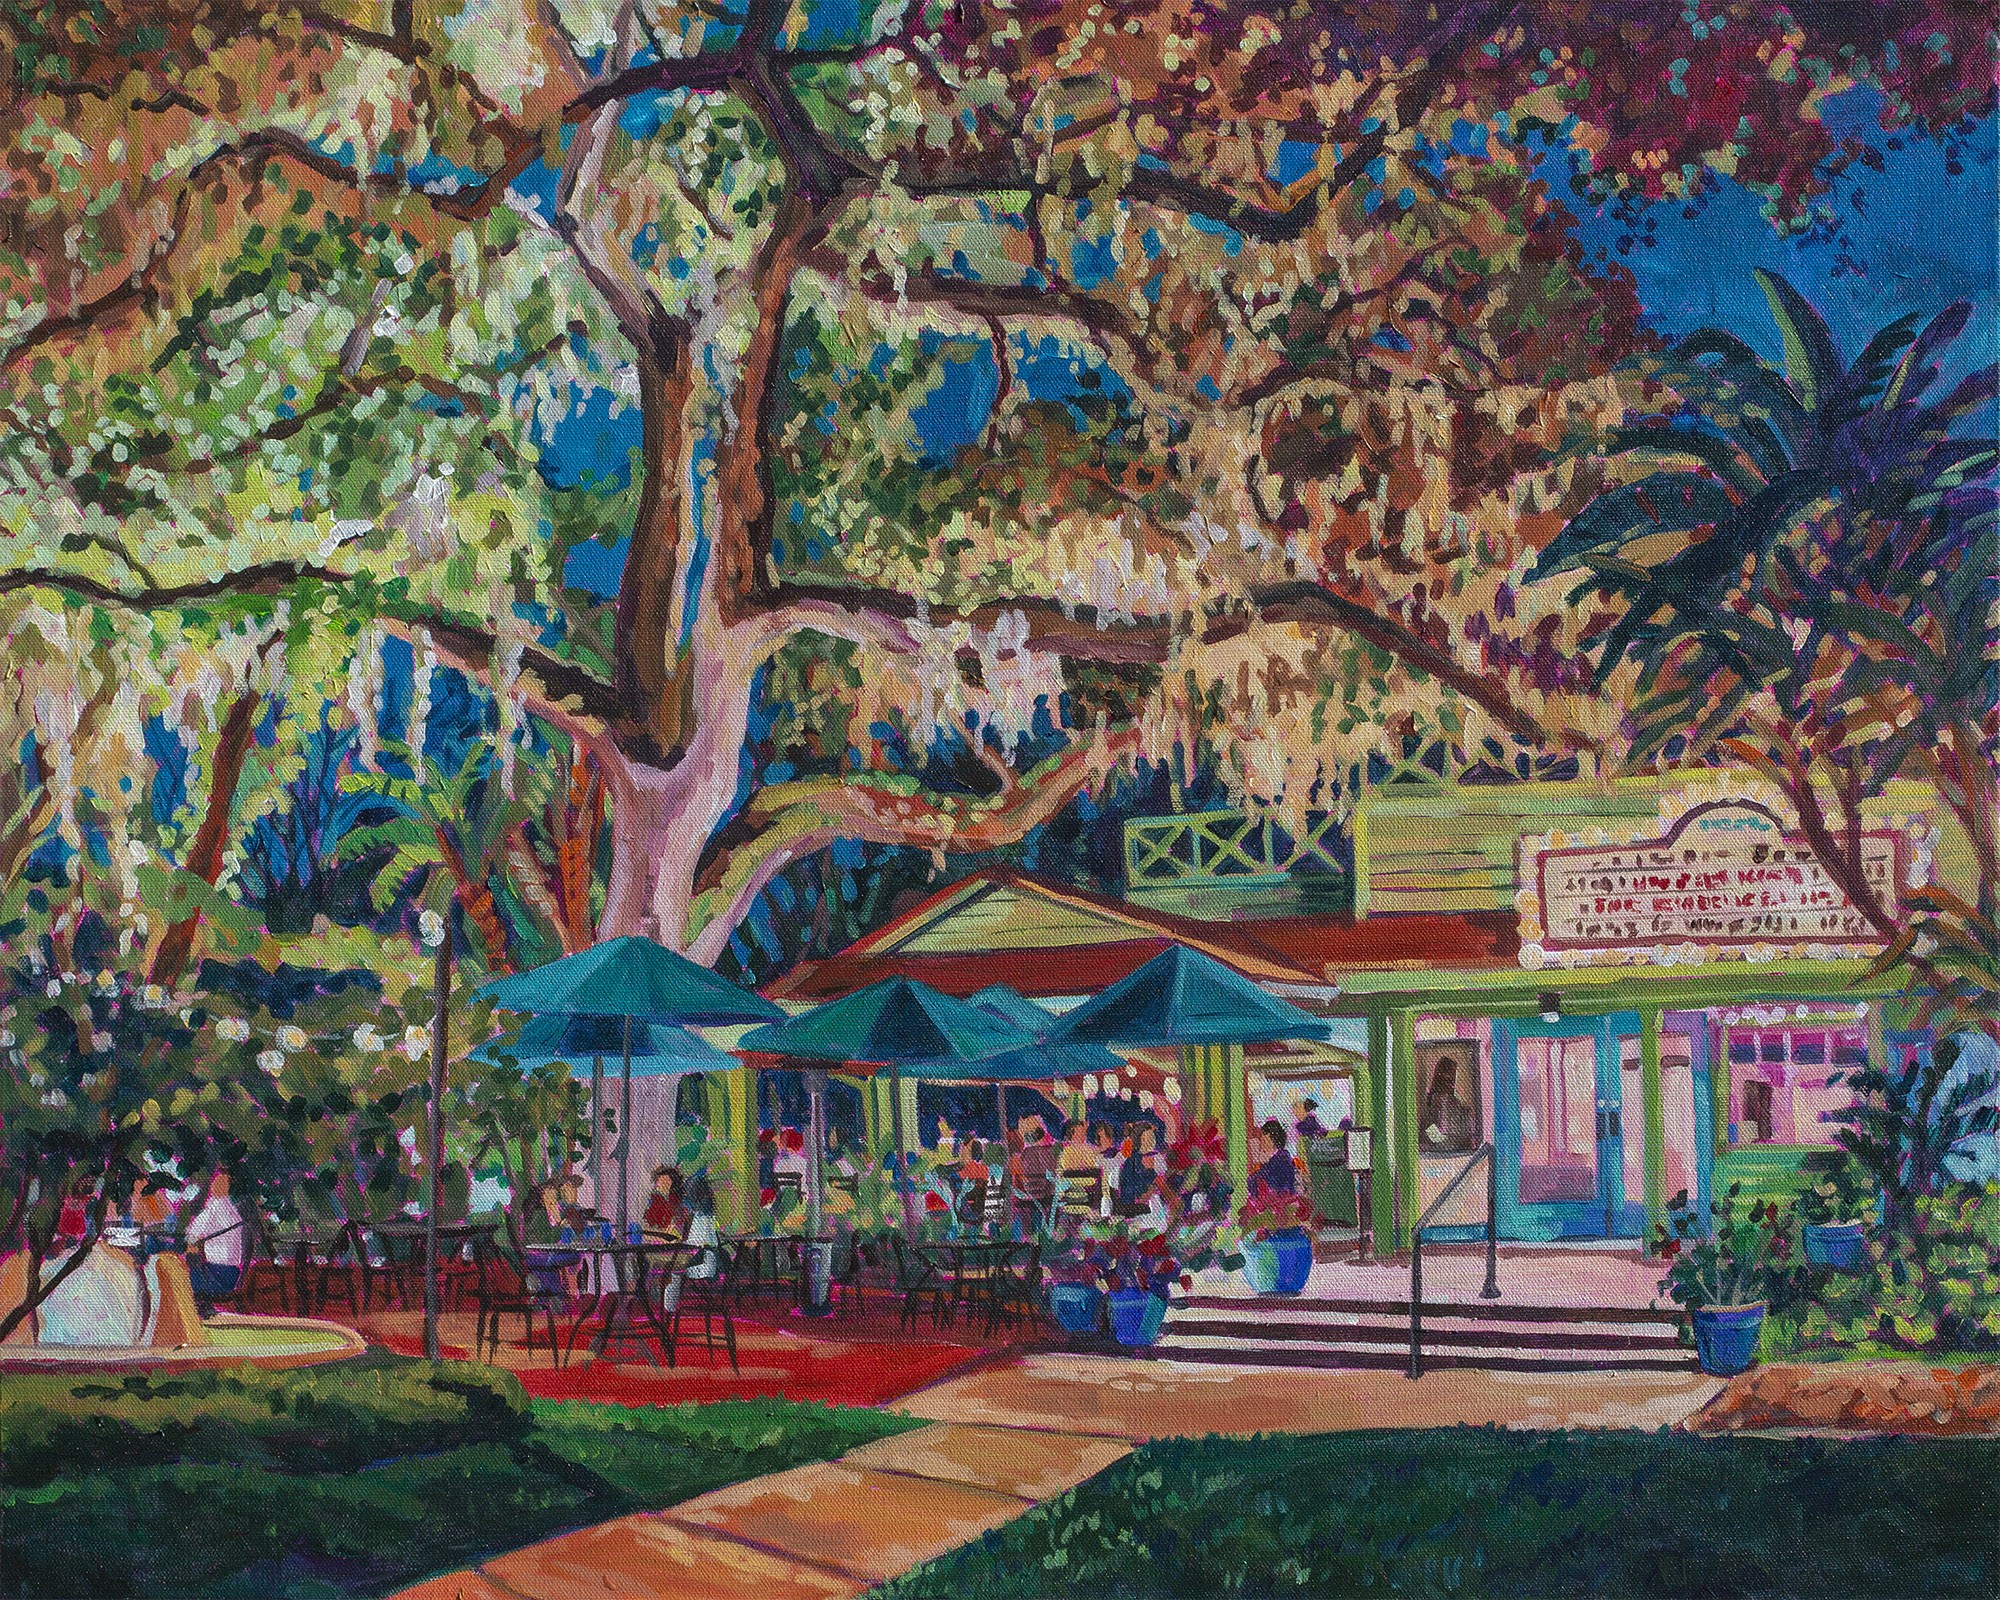 Night scene of outdoor bar/cafe with umbrellas, giant oak tree and tables of Enzian Theatre in Maitland/Winter Park Florida